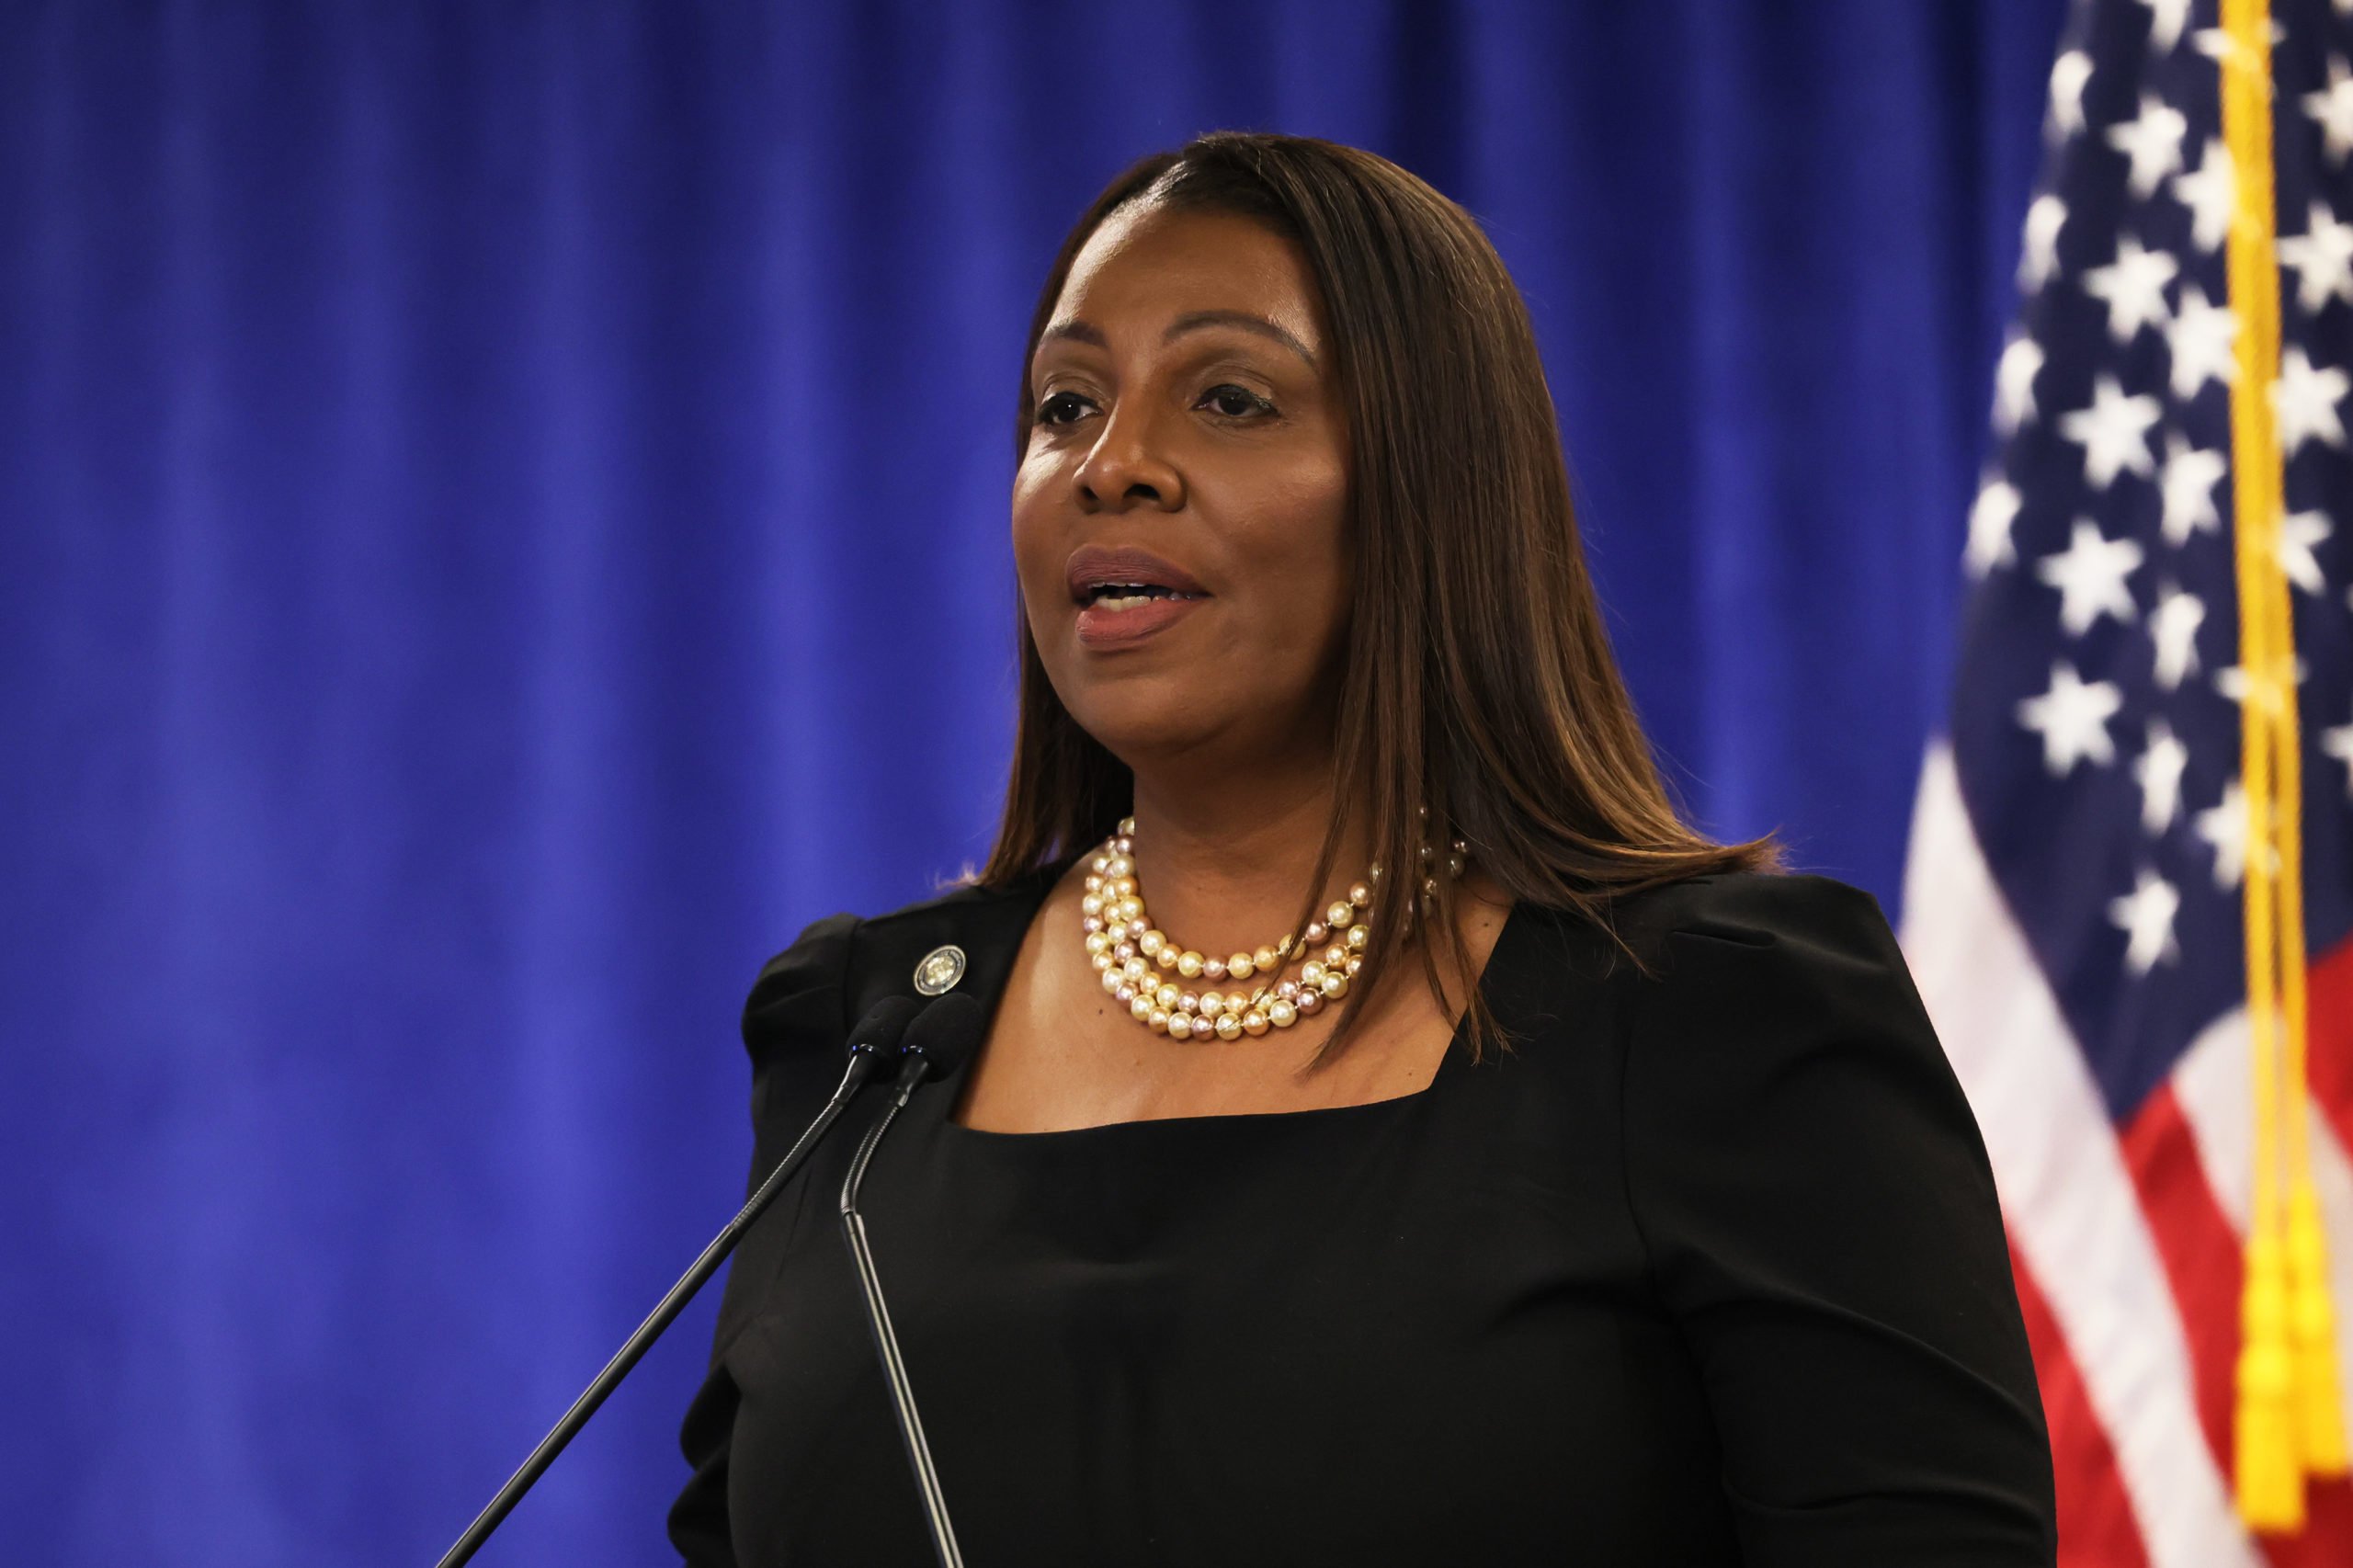 NEW YORK, NY - FEBRUARY 16: Attorney General Letitia James speaks during a press conference following a verdict against former U.S. President Donald Trump in a civil fraud trial on February 16, 2024 in New York City. Justice Arthur Engoron ruled against the former president finding him liable for conspiring to manipulating his networth and fining him $335 million and imposing a three year ban from serving in top roles at any NY company. The judge also banned Eric and Donald Trump Jr. for two years as well as a fine of more than four million dollars. (Photo by Michael M. Santiago/Getty Images)